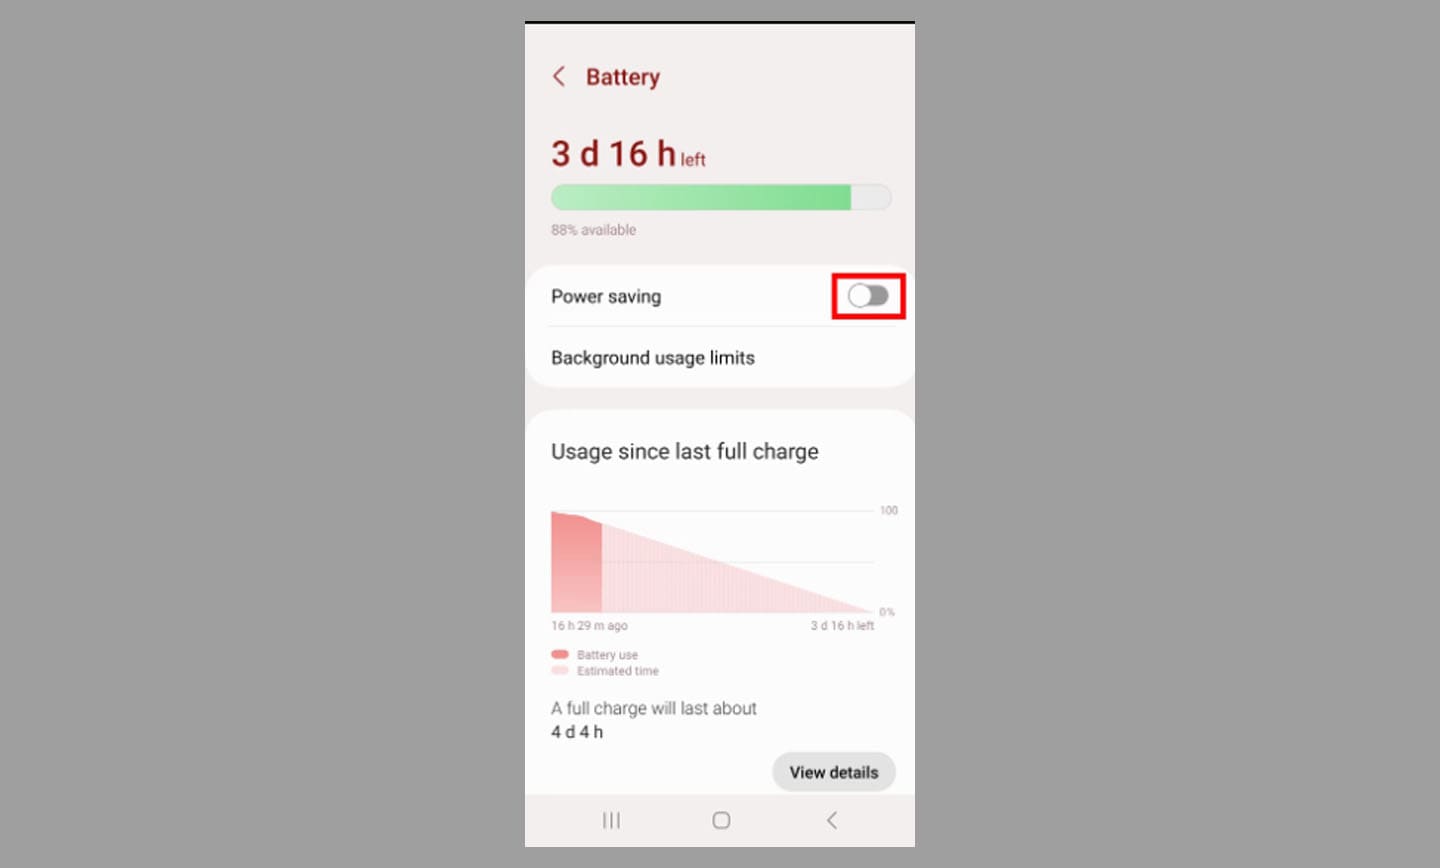 How to enable low power mode or power saving mode on mobile